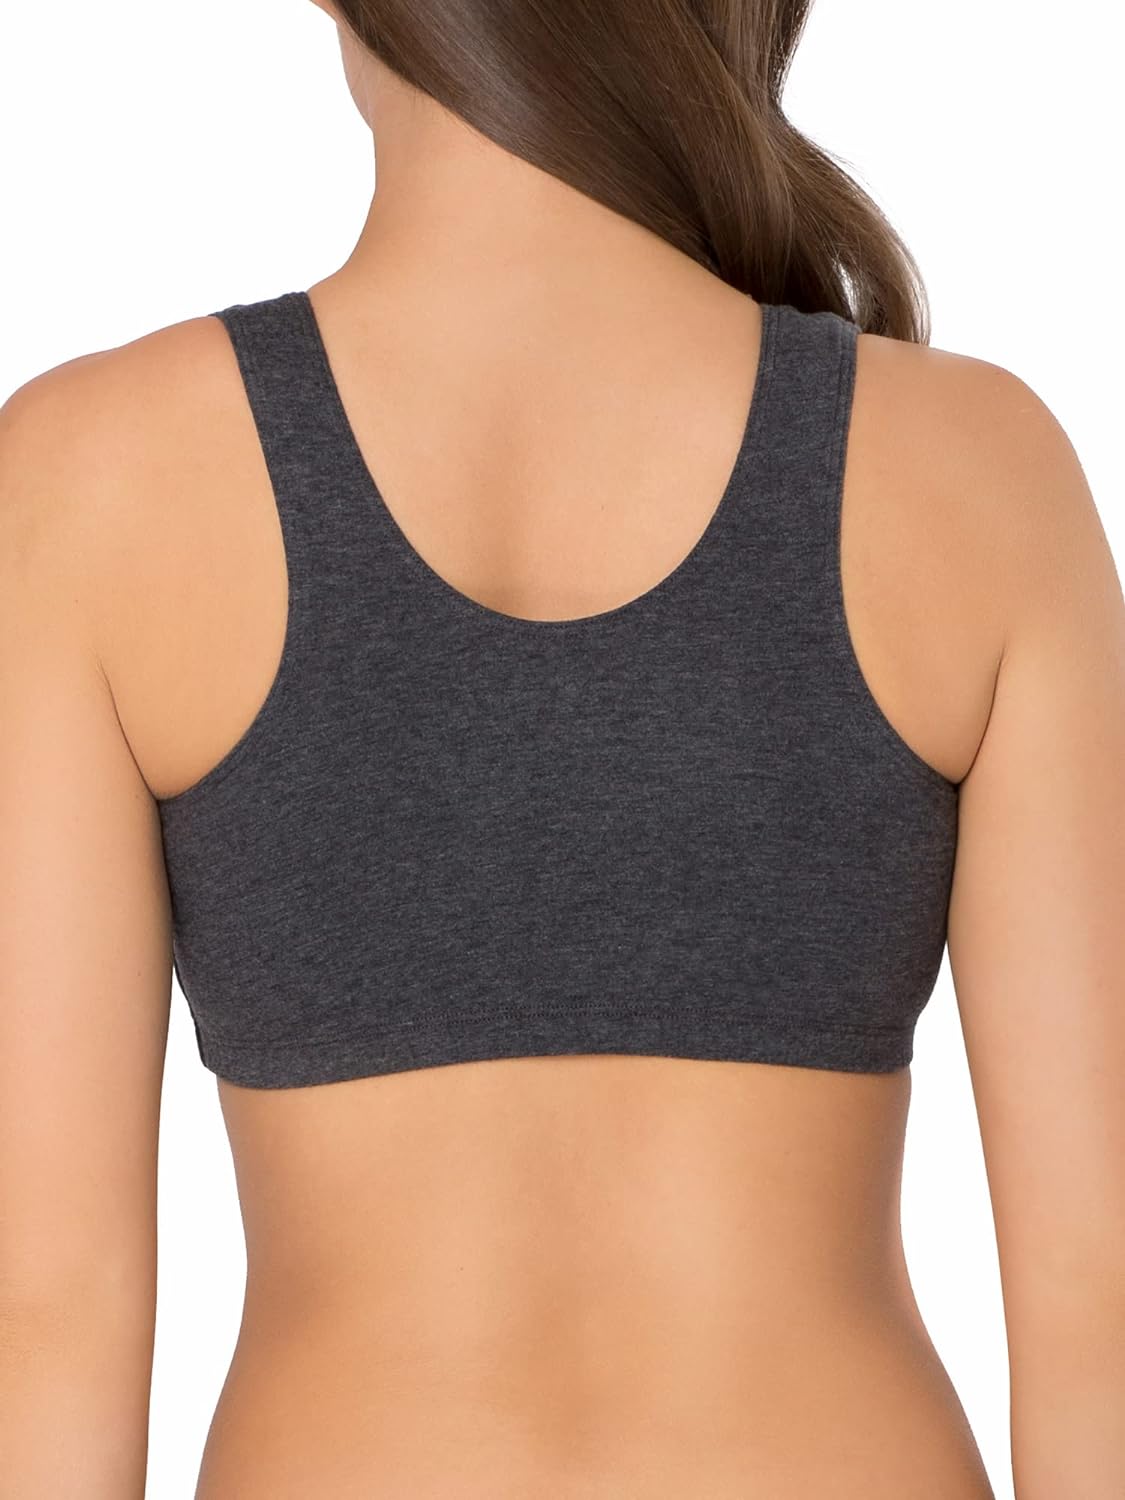 Fruit of the Loom Womens Built Up Tank Style Sports Bra Fashion Colors